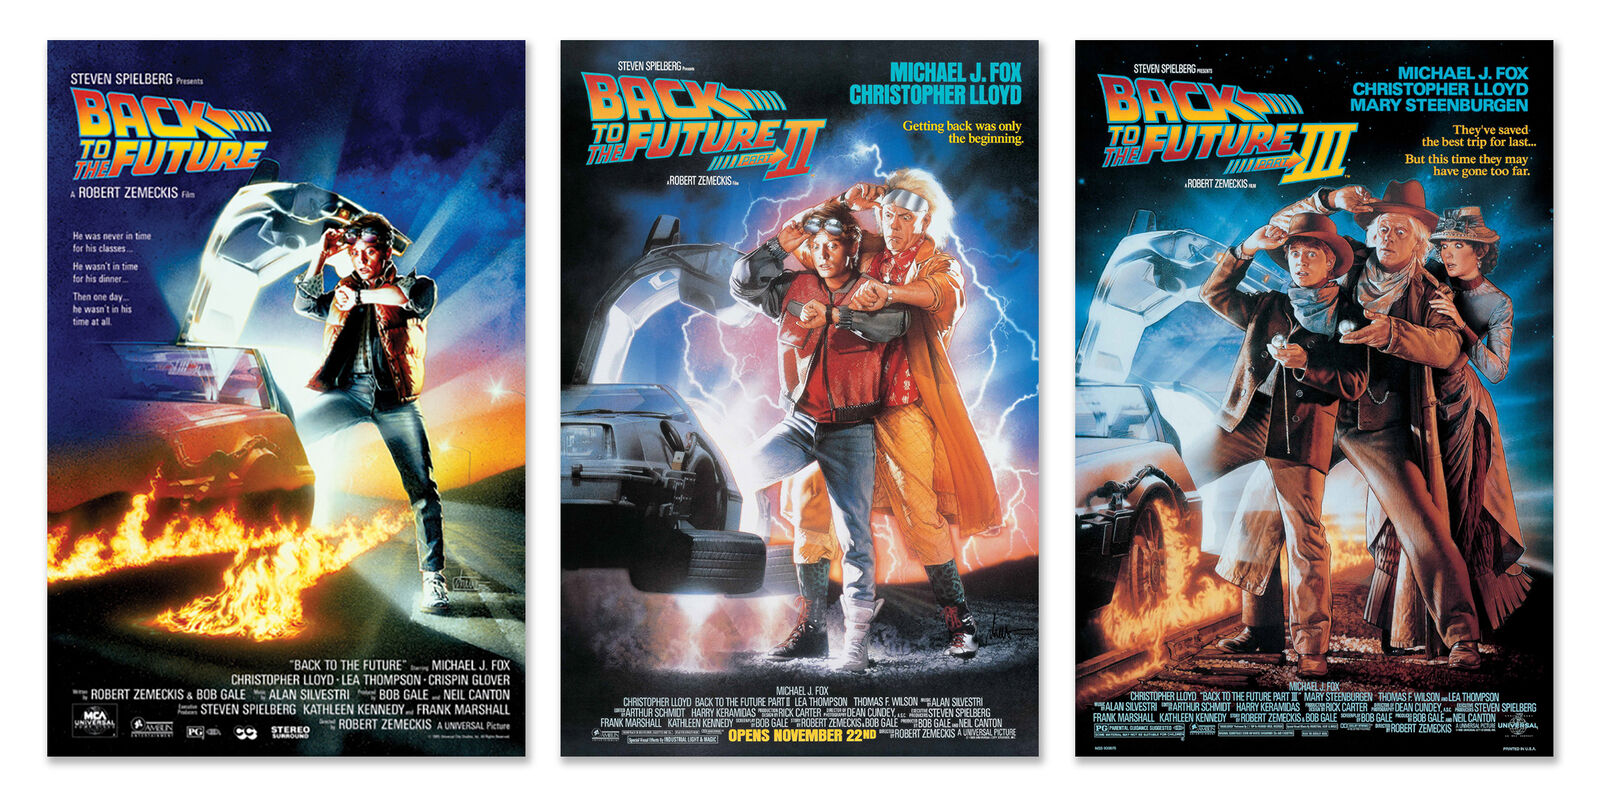 BACK TO THE FUTURE I, II & III - MOVIE POSTER SET (REGULARS) (SIZE: 24" x 36")